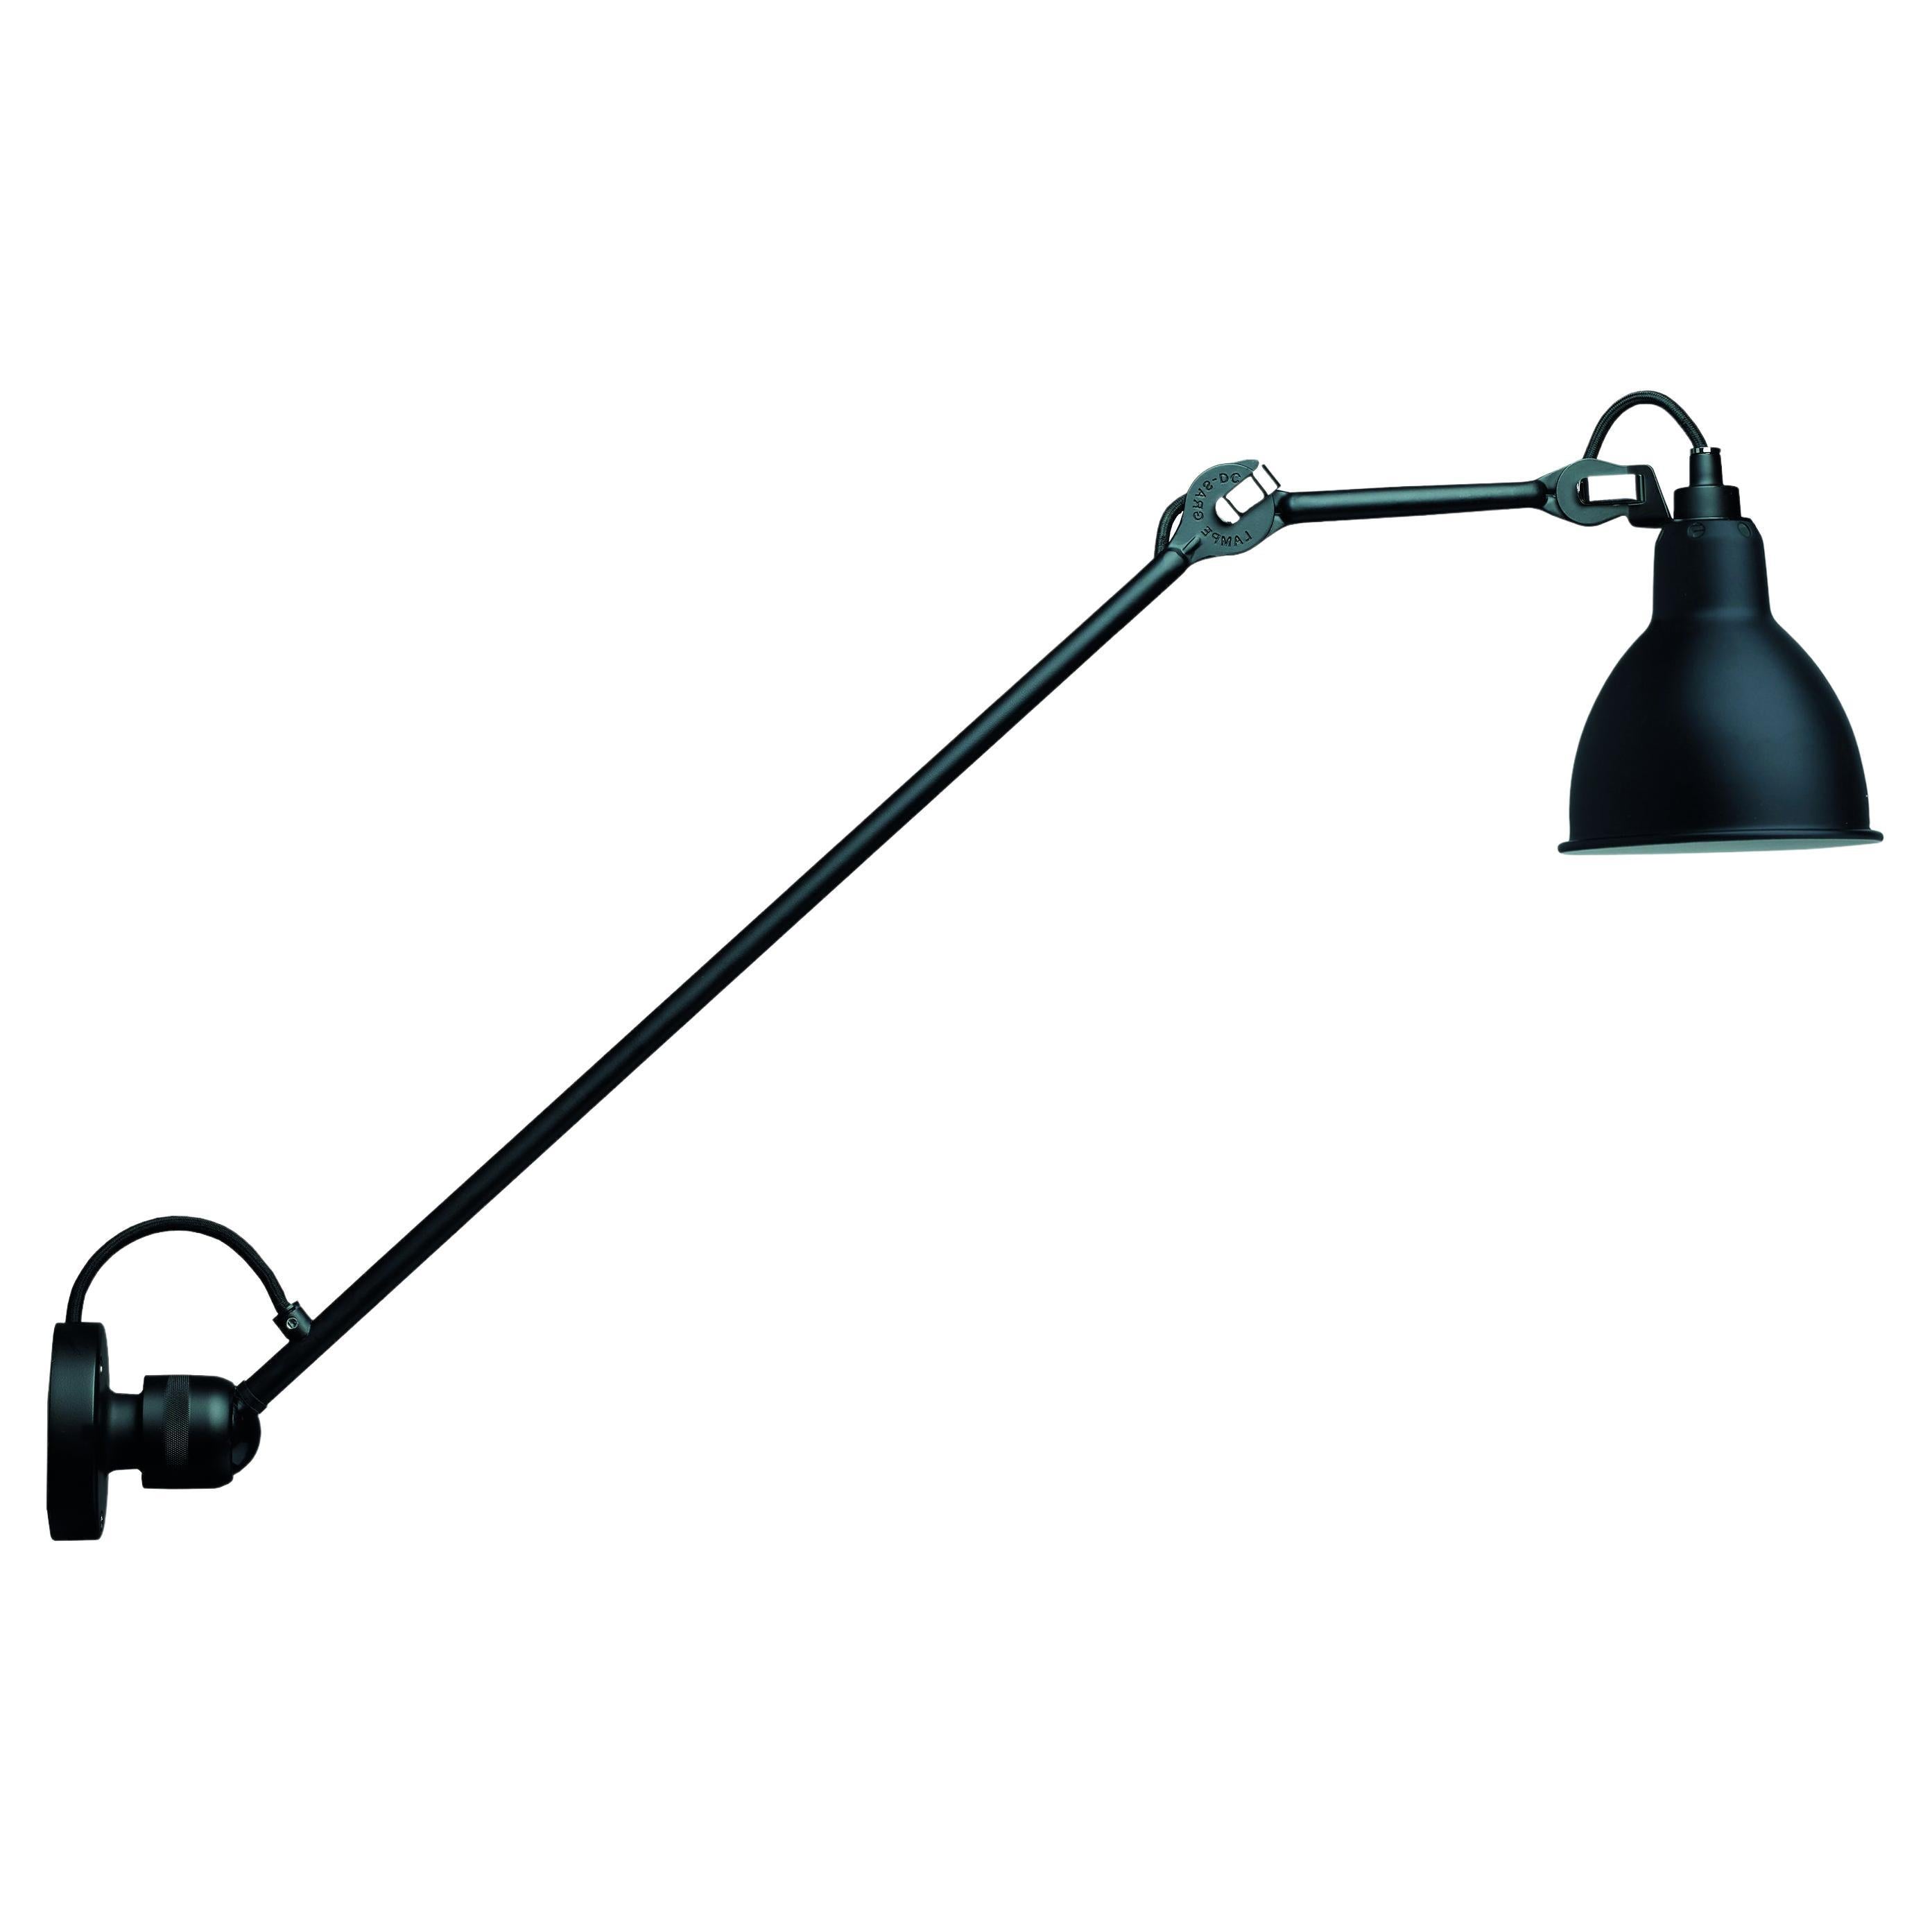 DCW Editions La Lampe Gras N°304 L60 Wall Lamp in Black Arm and Black Shade For Sale